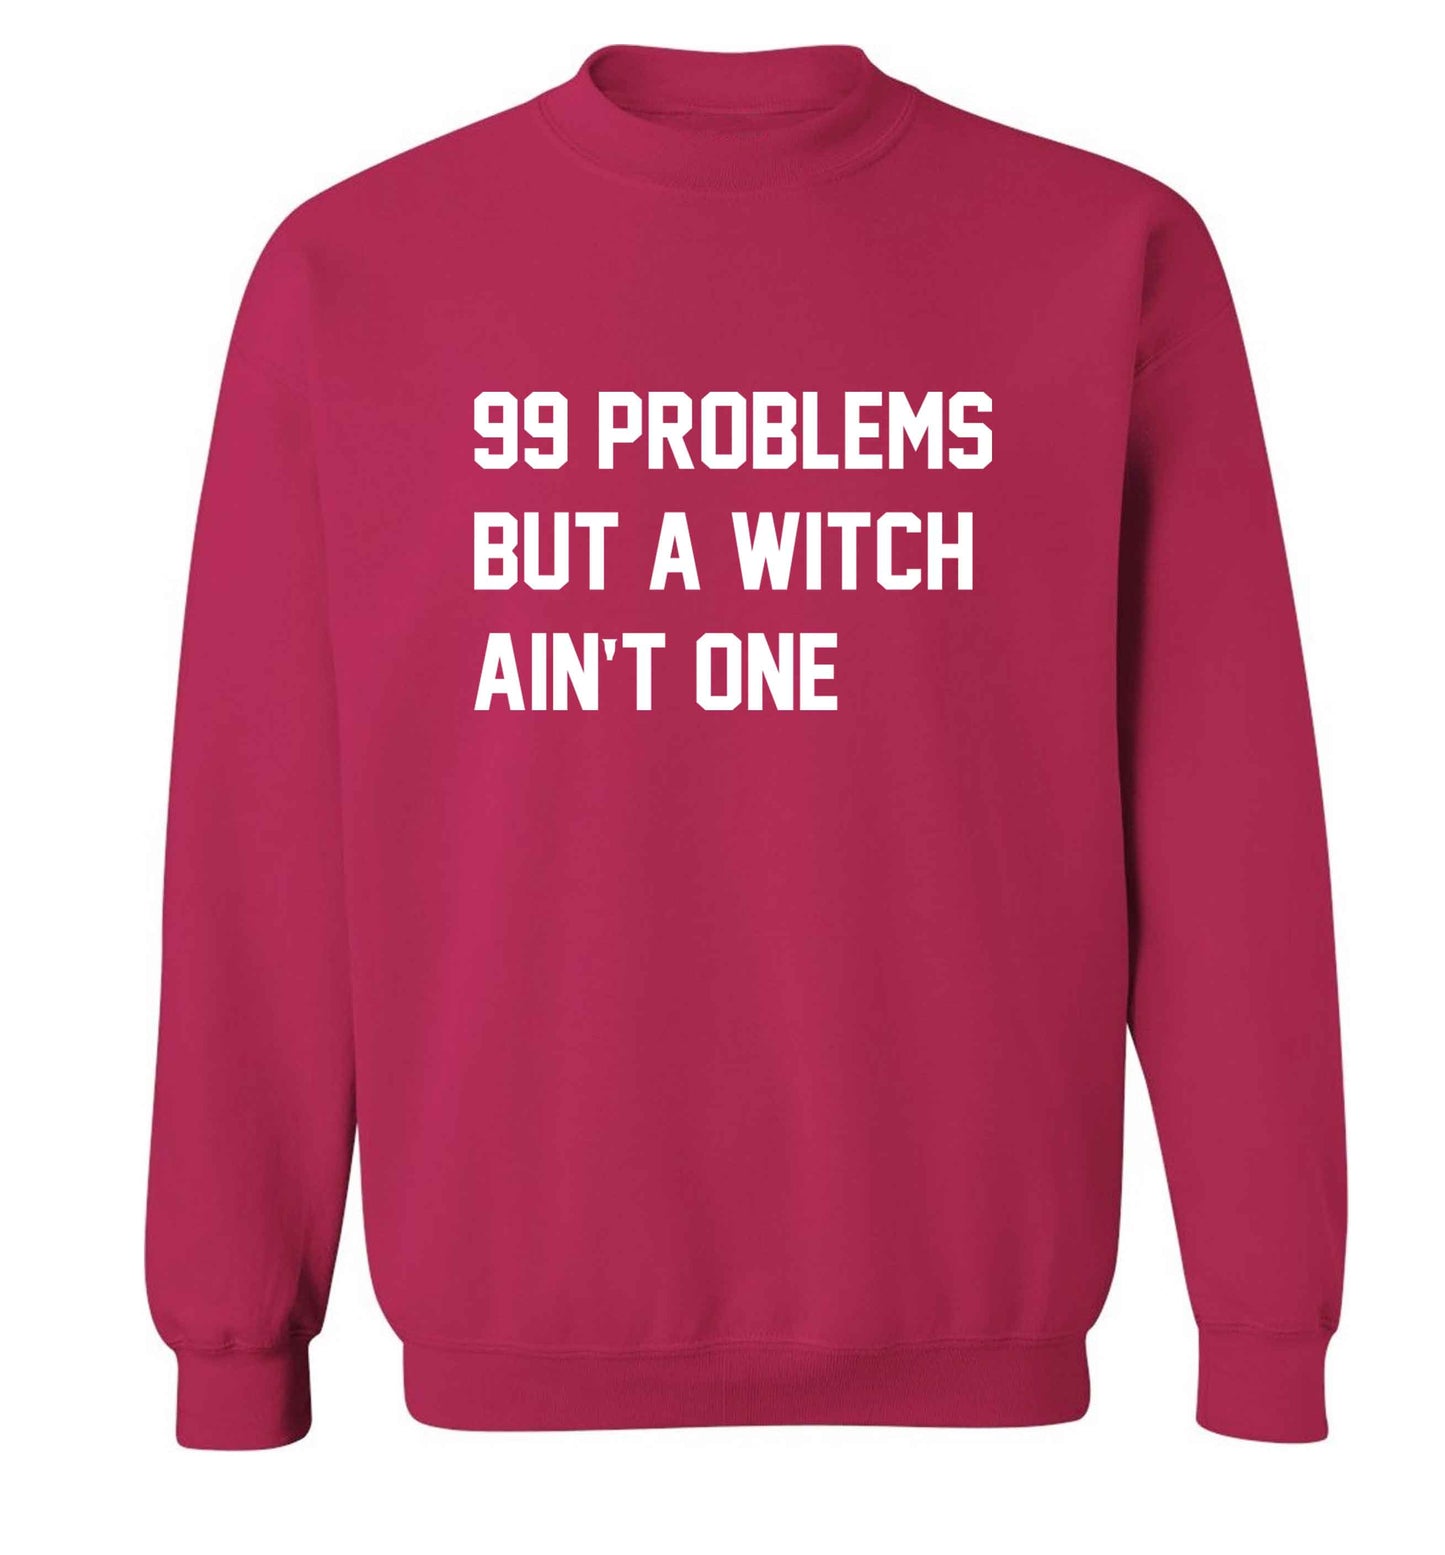 99 Problems but a witch aint one adult's unisex pink sweater 2XL